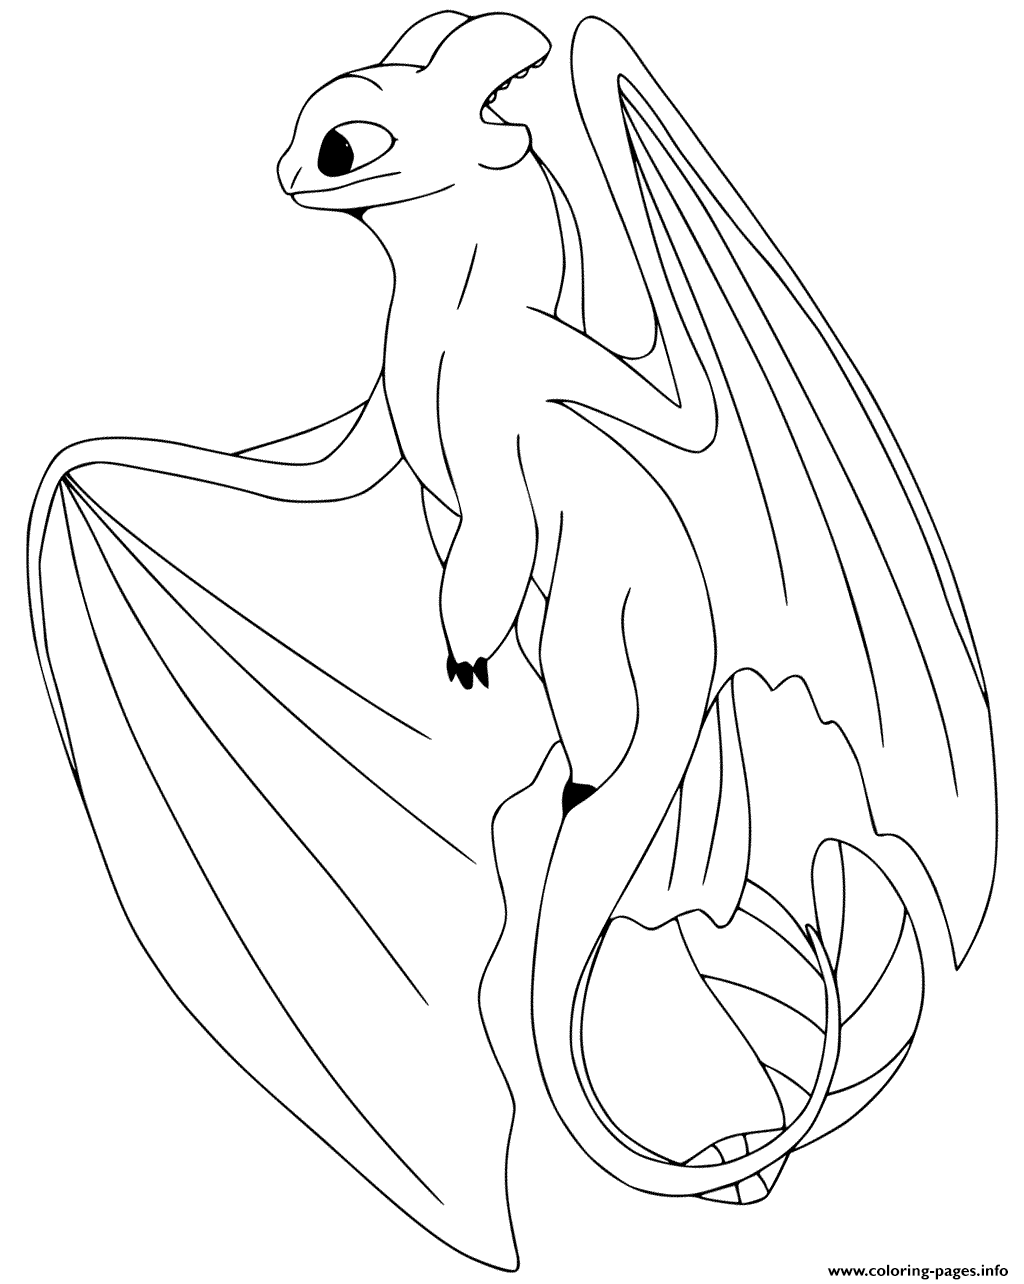 how-to-train-your-dragon-coloring-pages-light-fury-cloudjumper-dragon